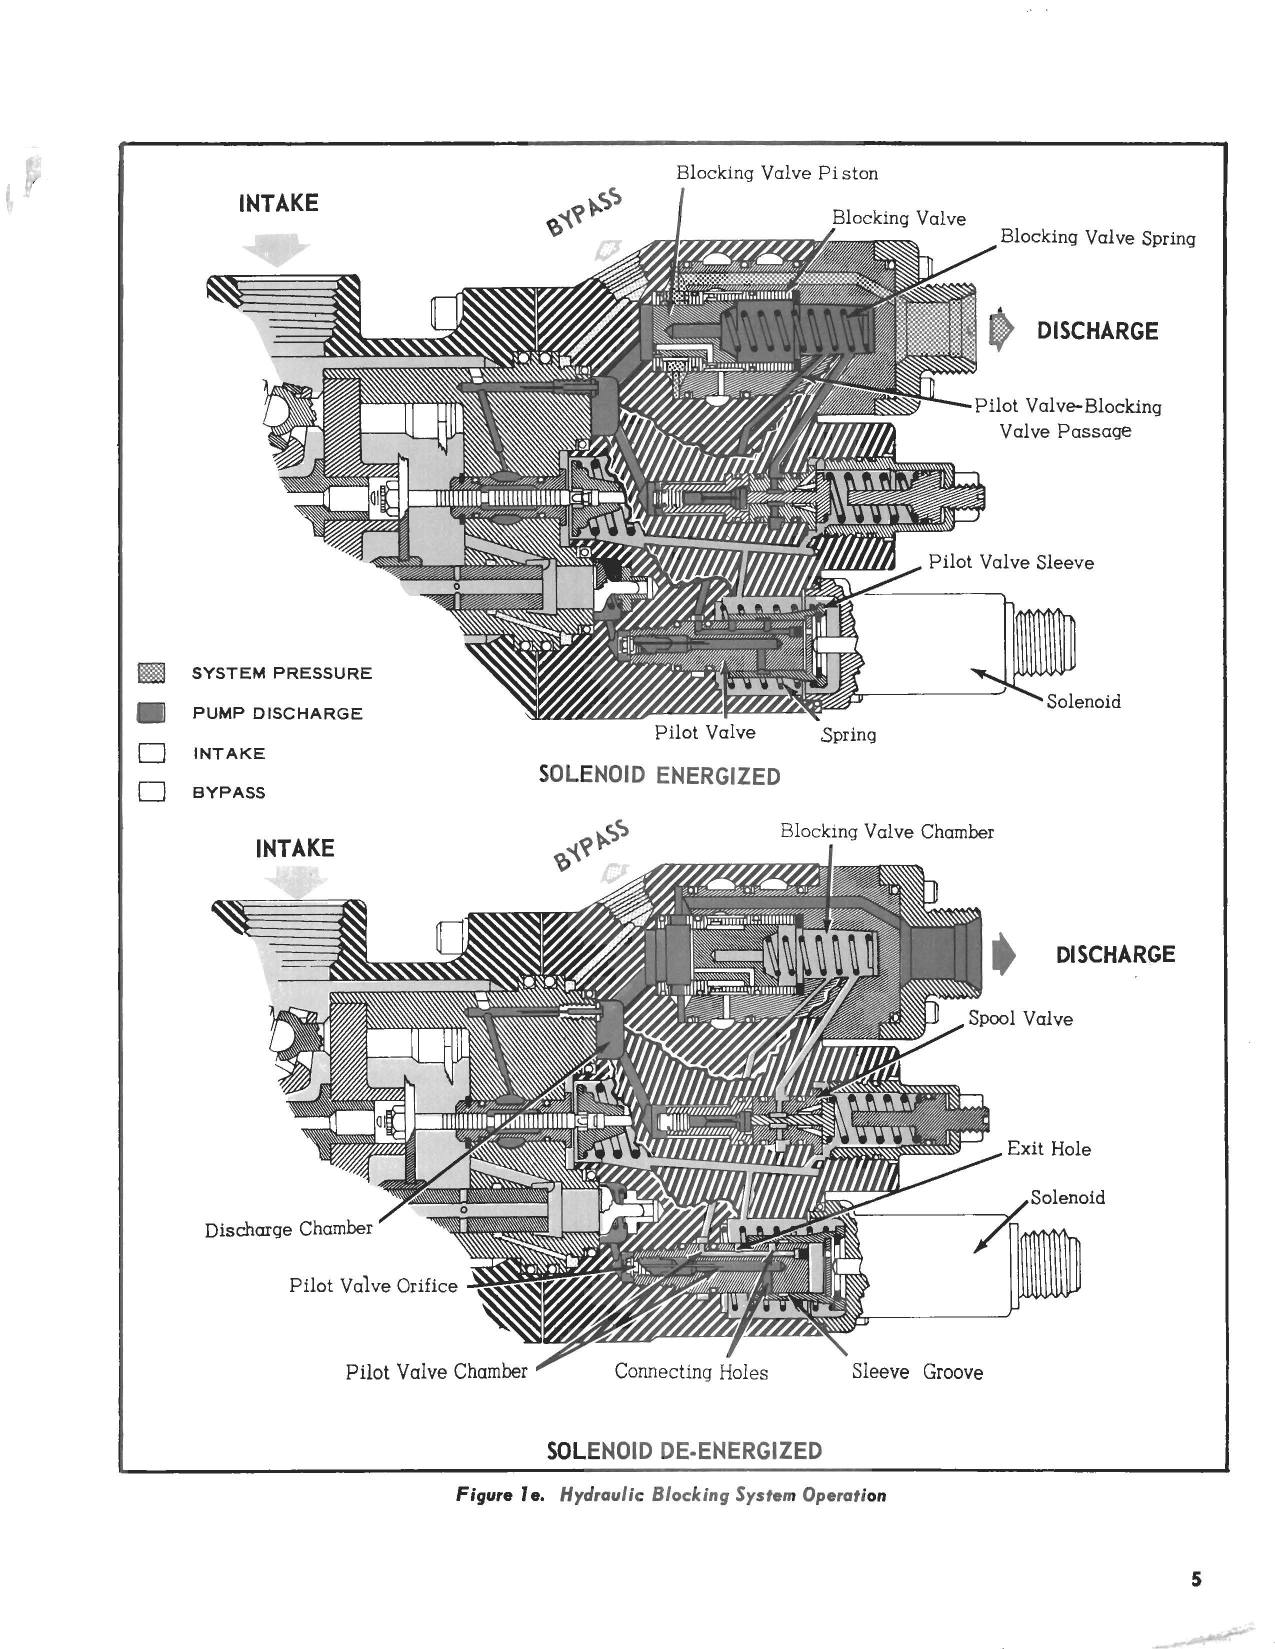 Sample page 7 from AirCorps Library document: Overhaul and Maintenance for Stratopower Aircraft Hydraulics - 65WC Series - Pump Model 65WC06001